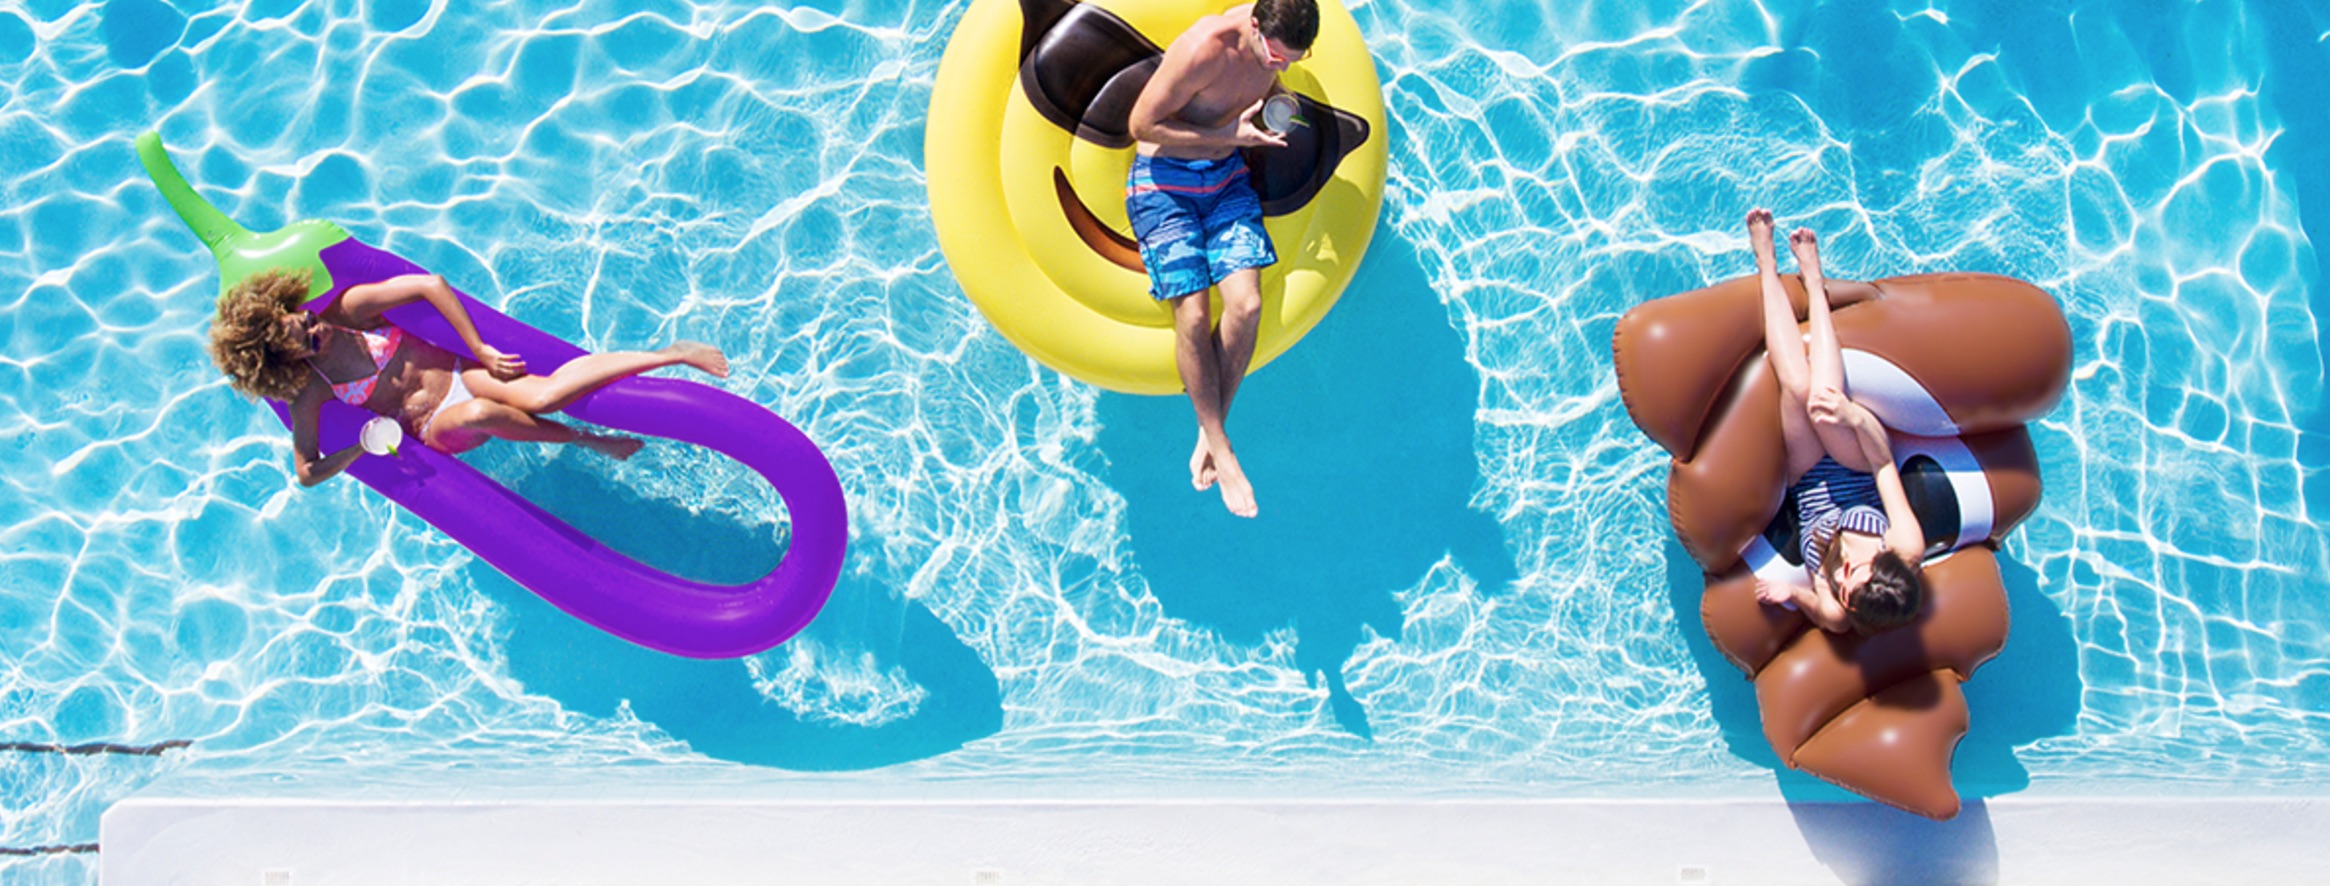 Buzzfeed Wants To Sell You Ohio-Scented Candles And Poo Emoji Pool Floats